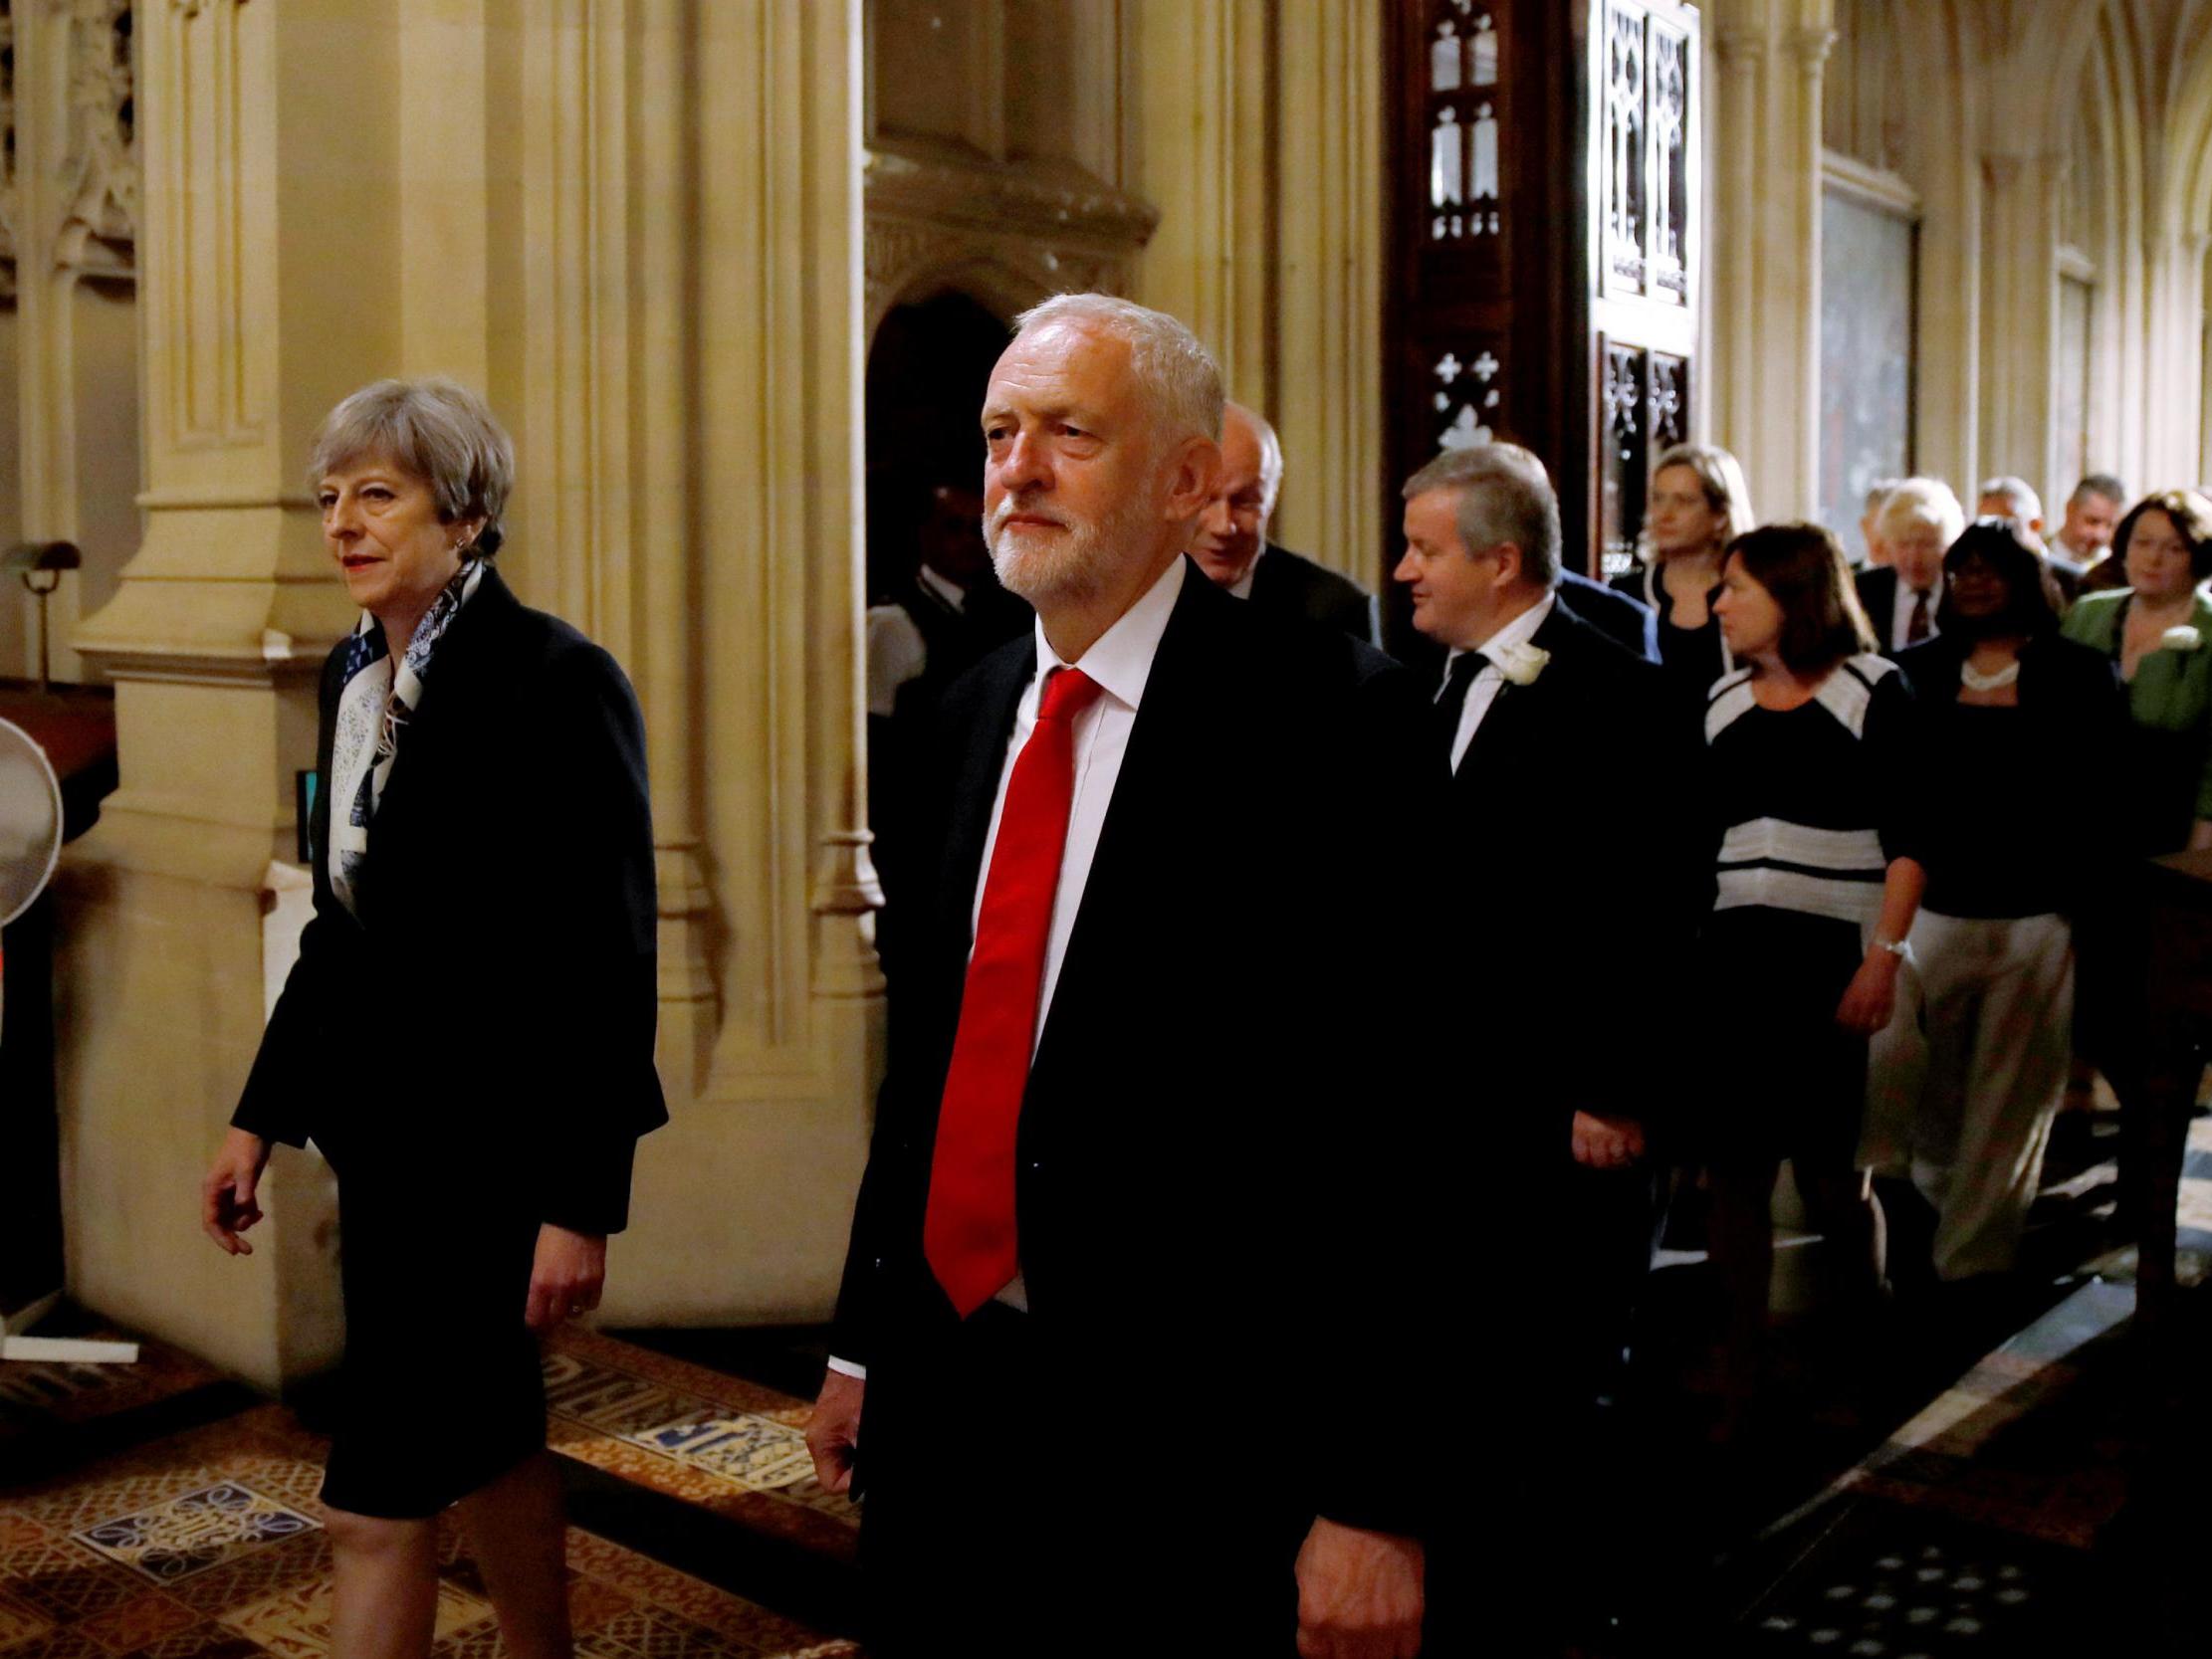 Labour might go into the next election with a built in, and quite unfair, 15-seat advantage